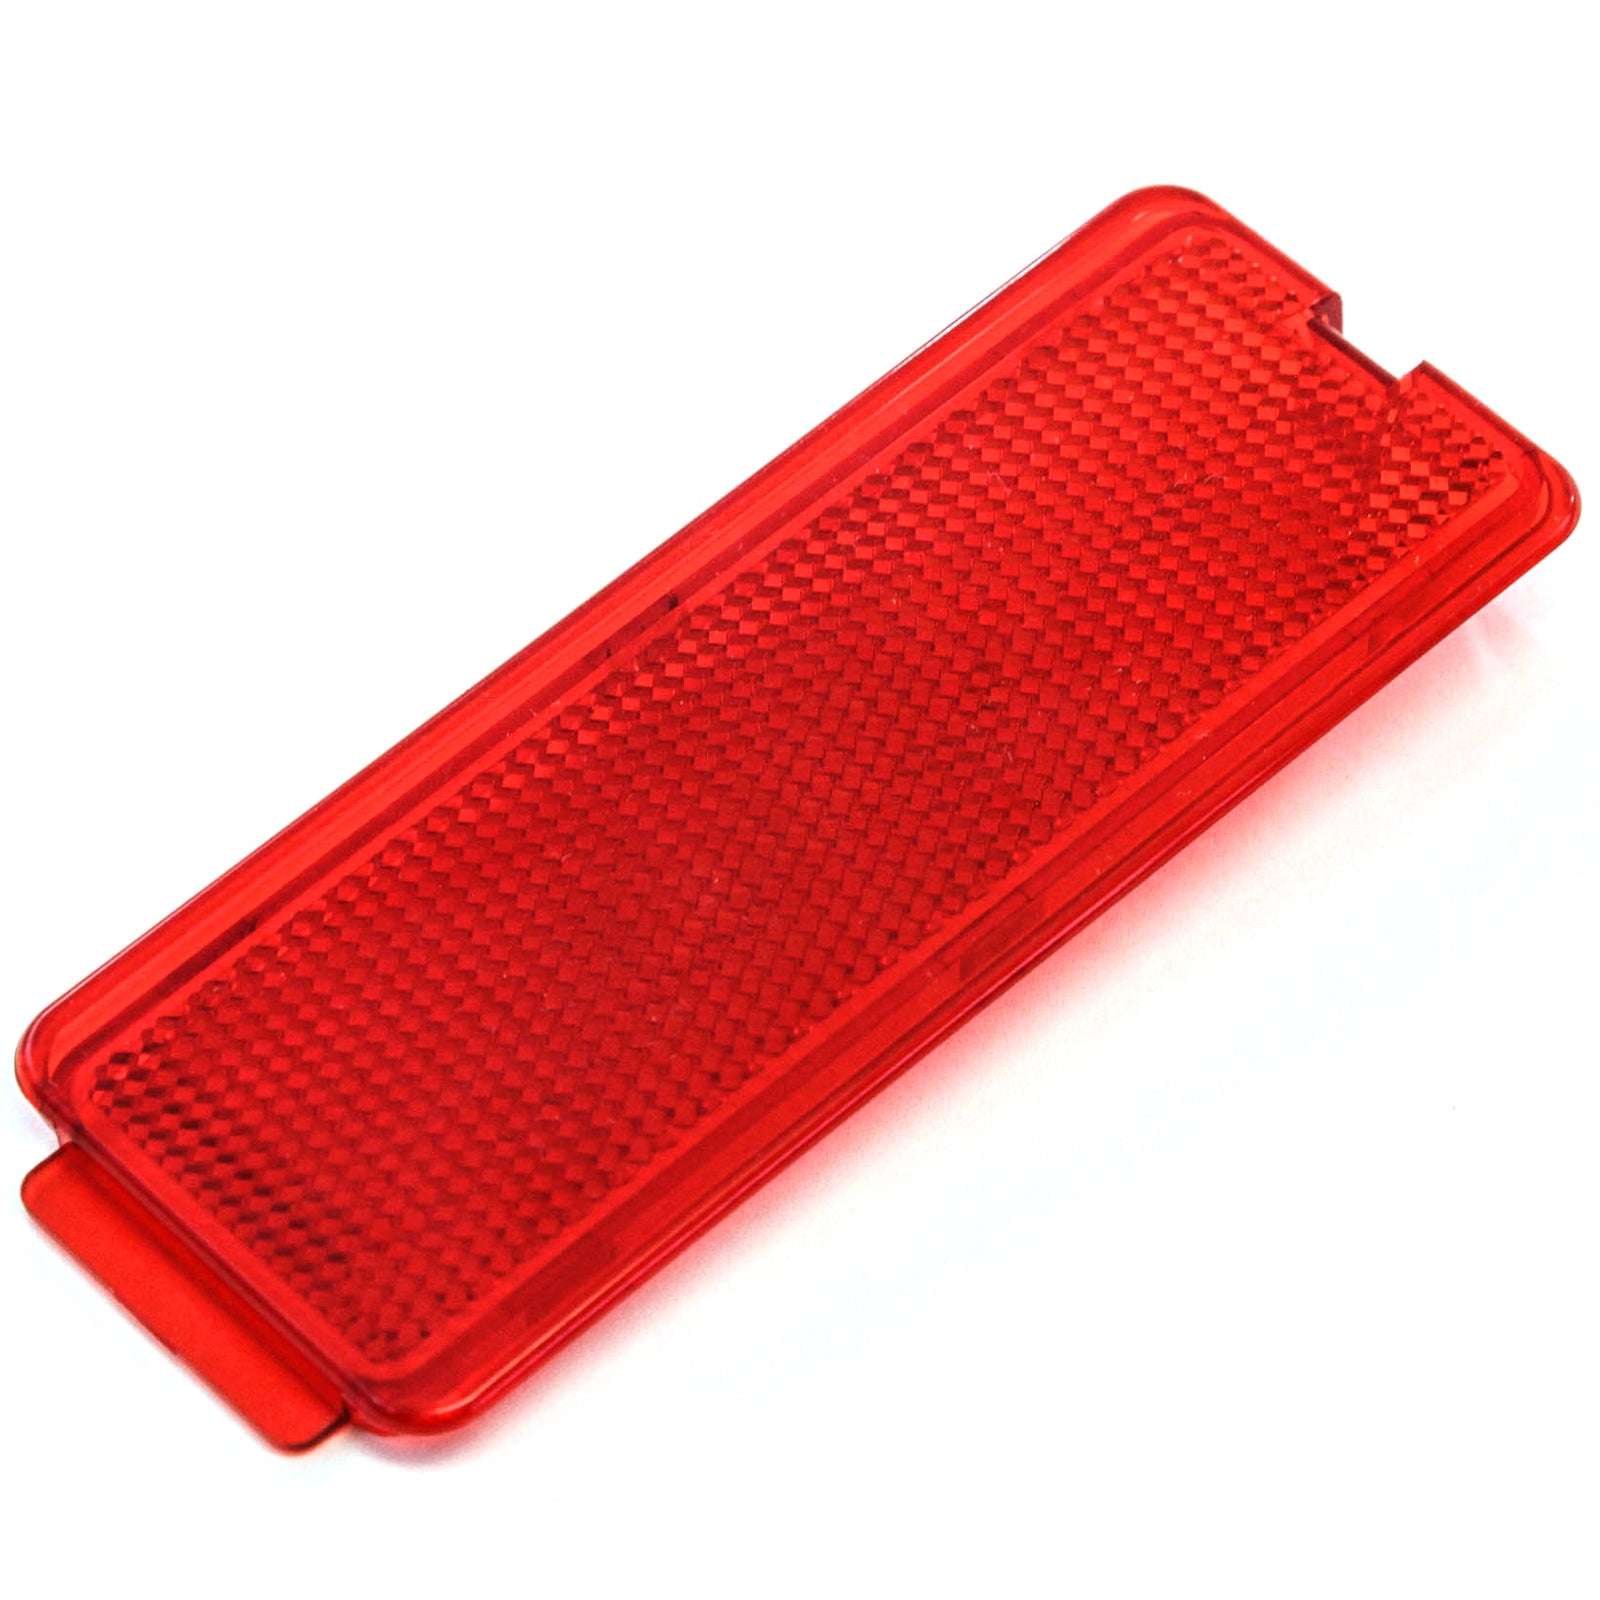 Premium Door Reflector Interior Red Compatible with Ford (1999-2007 SuperDuty F250 F350 F450 F550 Super Duty & 2000-2005 Excursion)